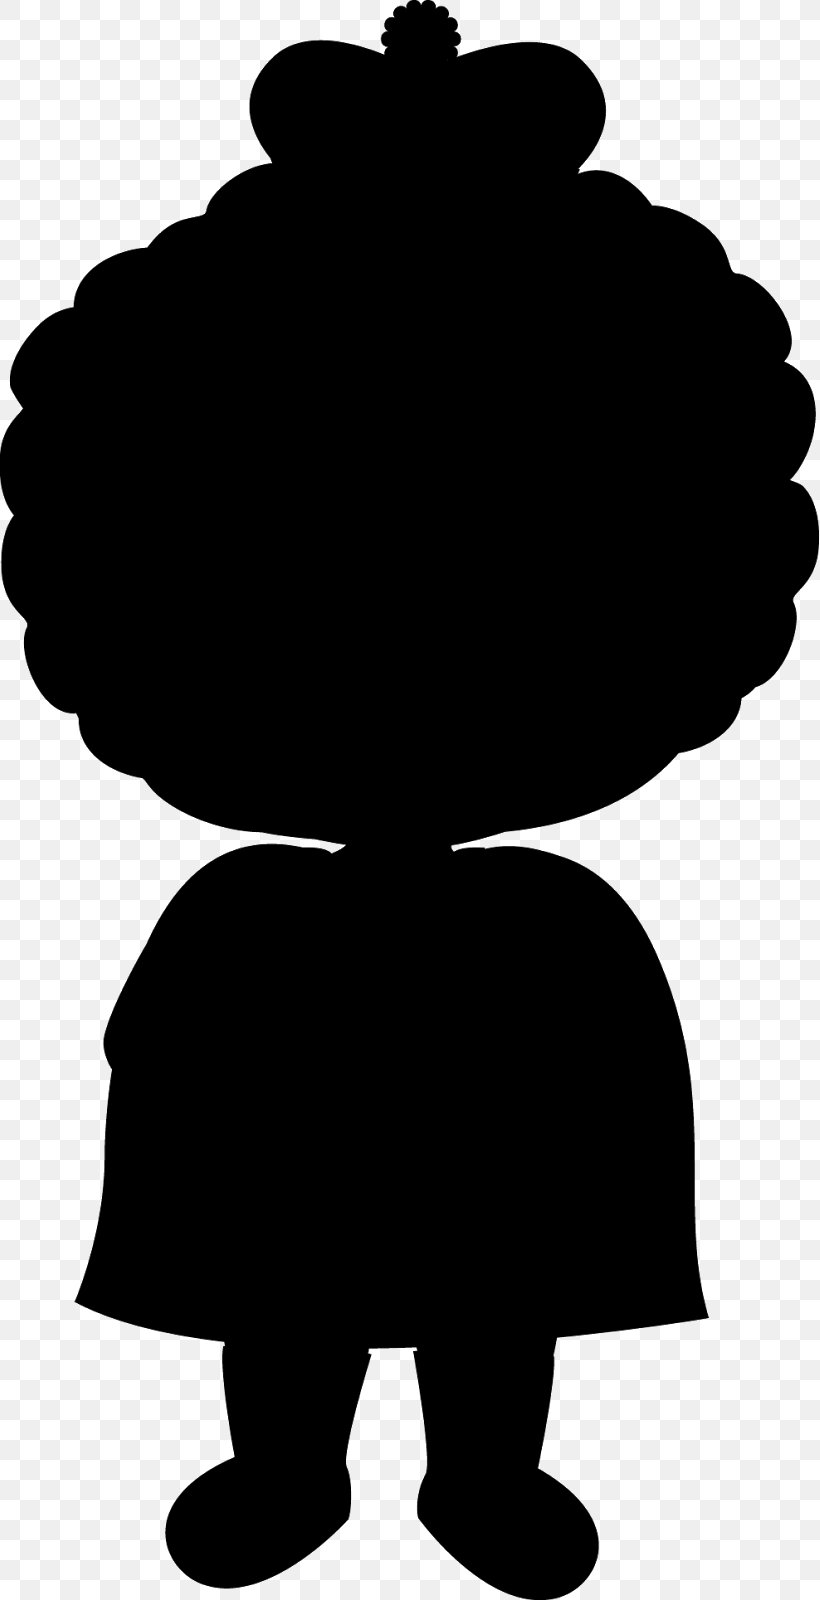 Silhouette Clip Art Image Illustration Photography, PNG, 819x1600px, Silhouette, Art, Blackandwhite, Human, Person Download Free